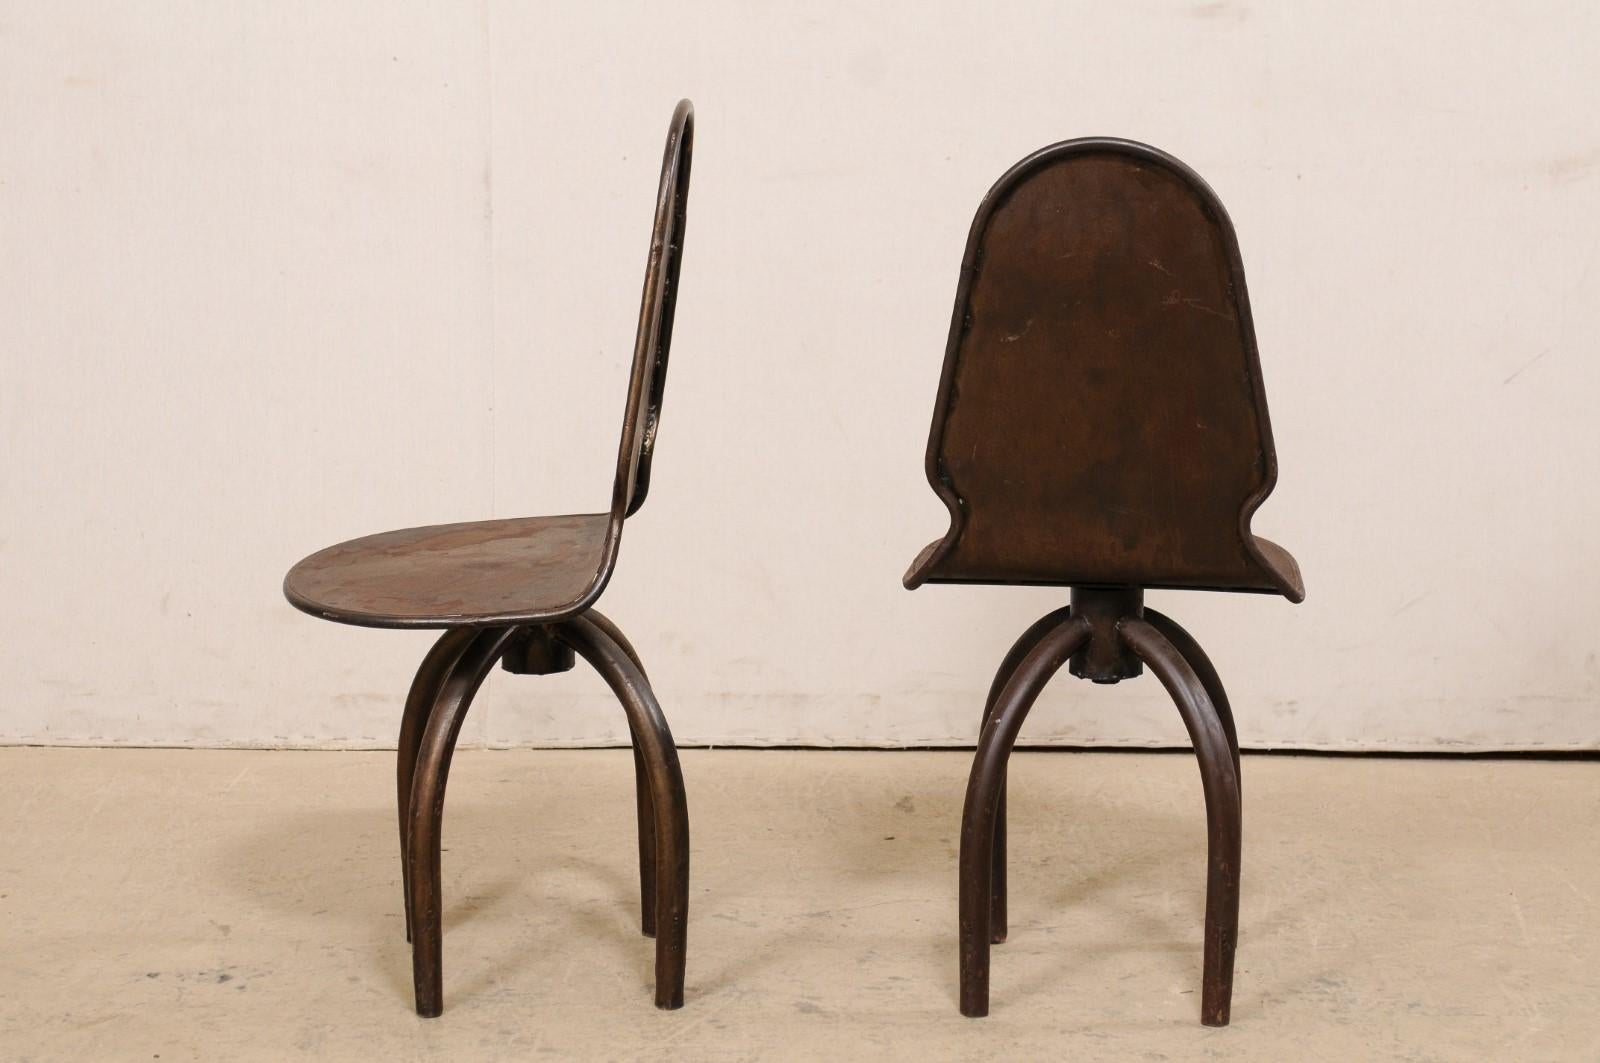 Spanish Pair of Iron Swivel Chairs on Spider-Style Legs, Industrial-Chic For Sale 2